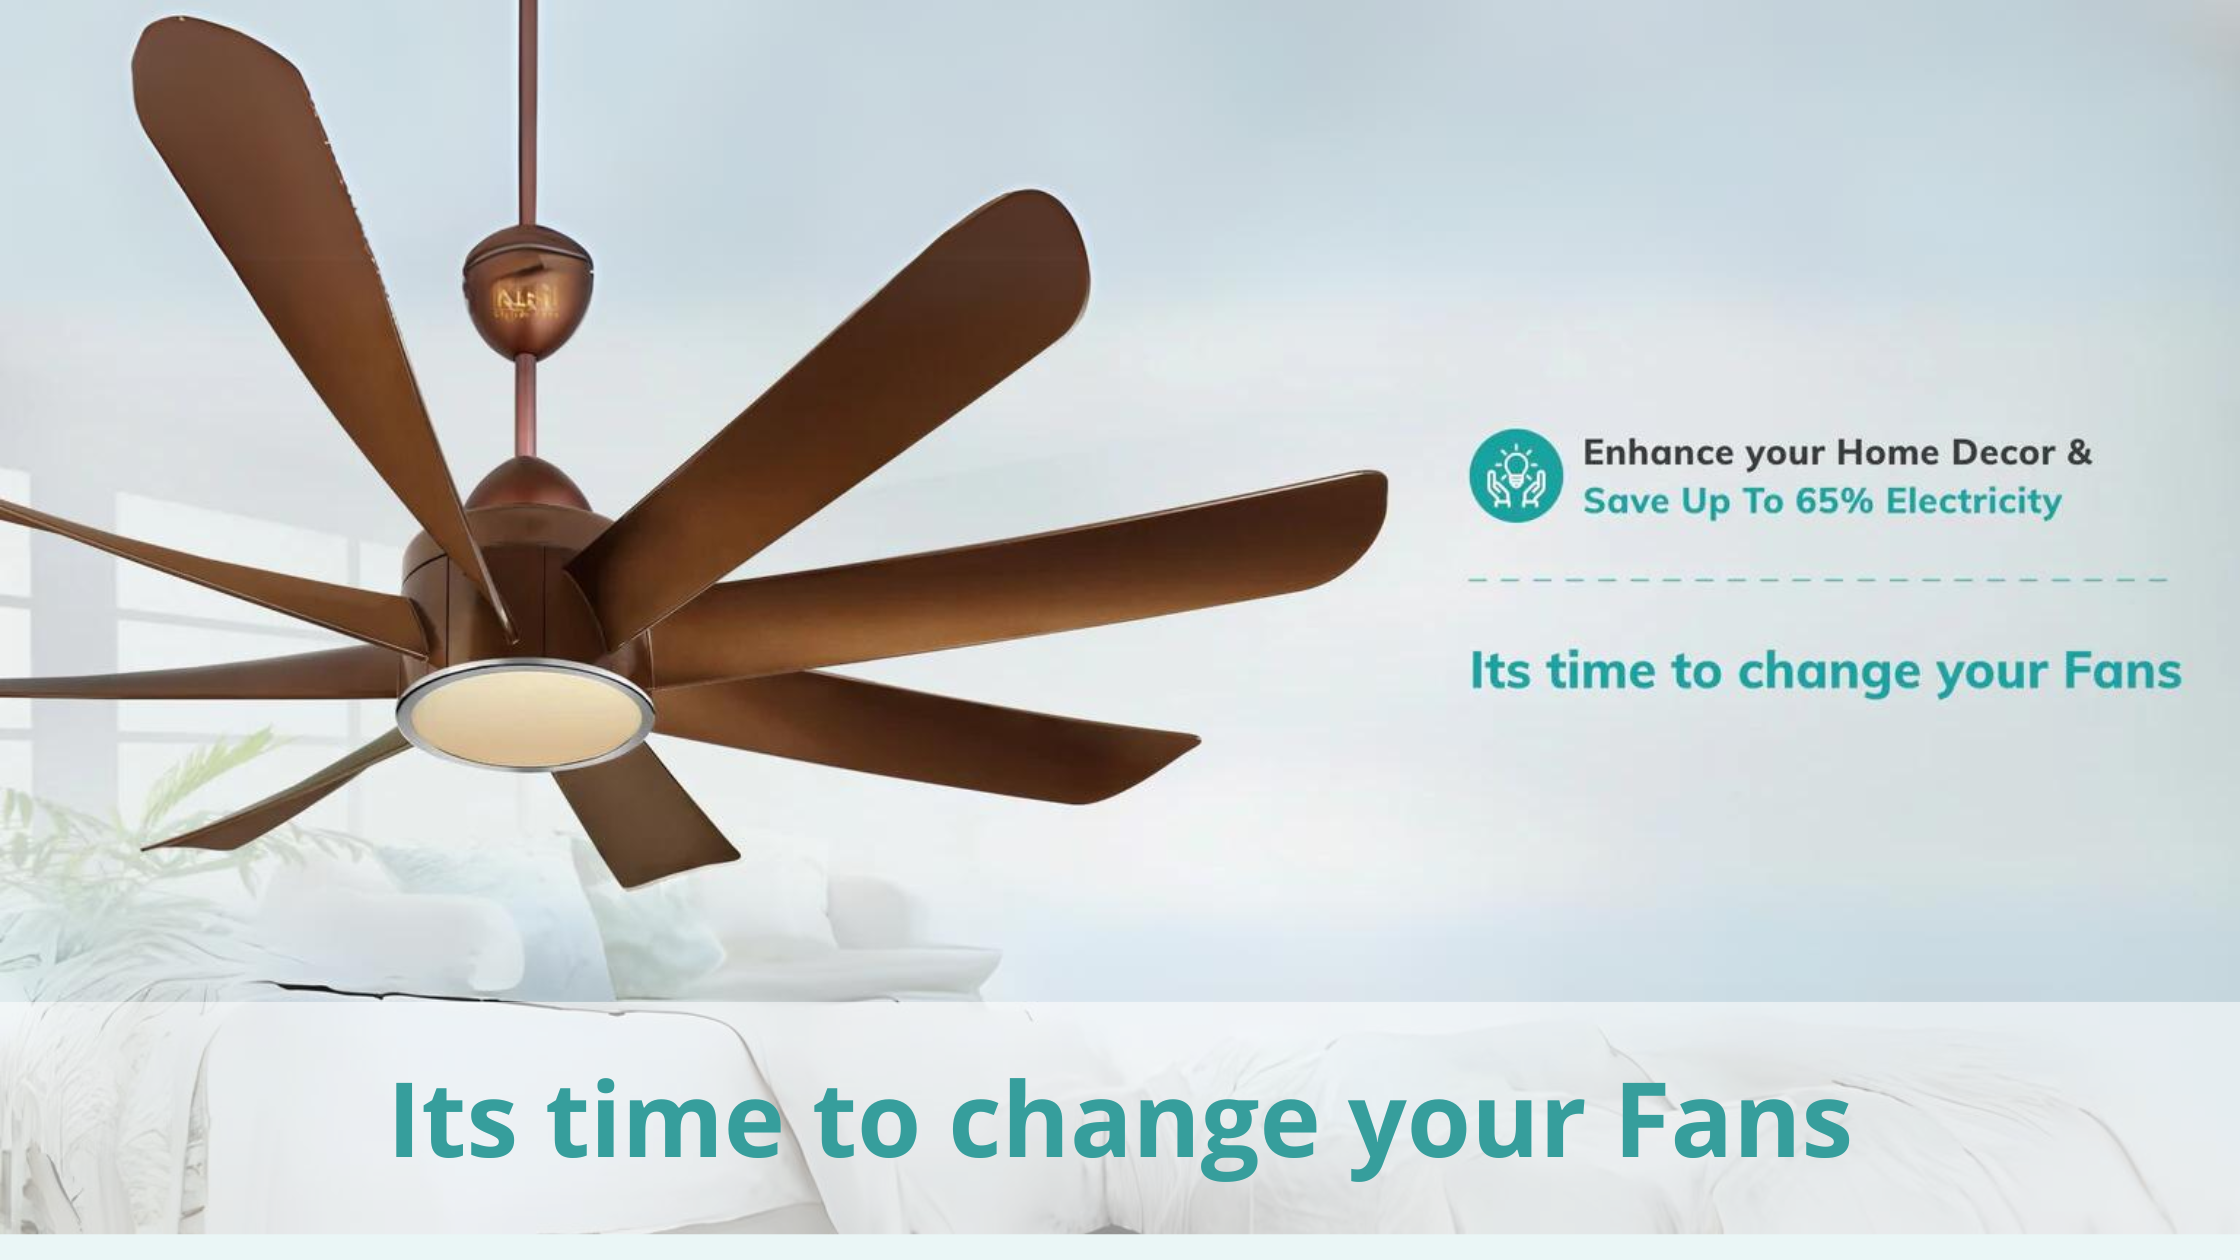 Explore Kuhl Ceiling Fans for unmatched style & efficiency. Learn about their design, performance, and energy savings in our detailed guide.